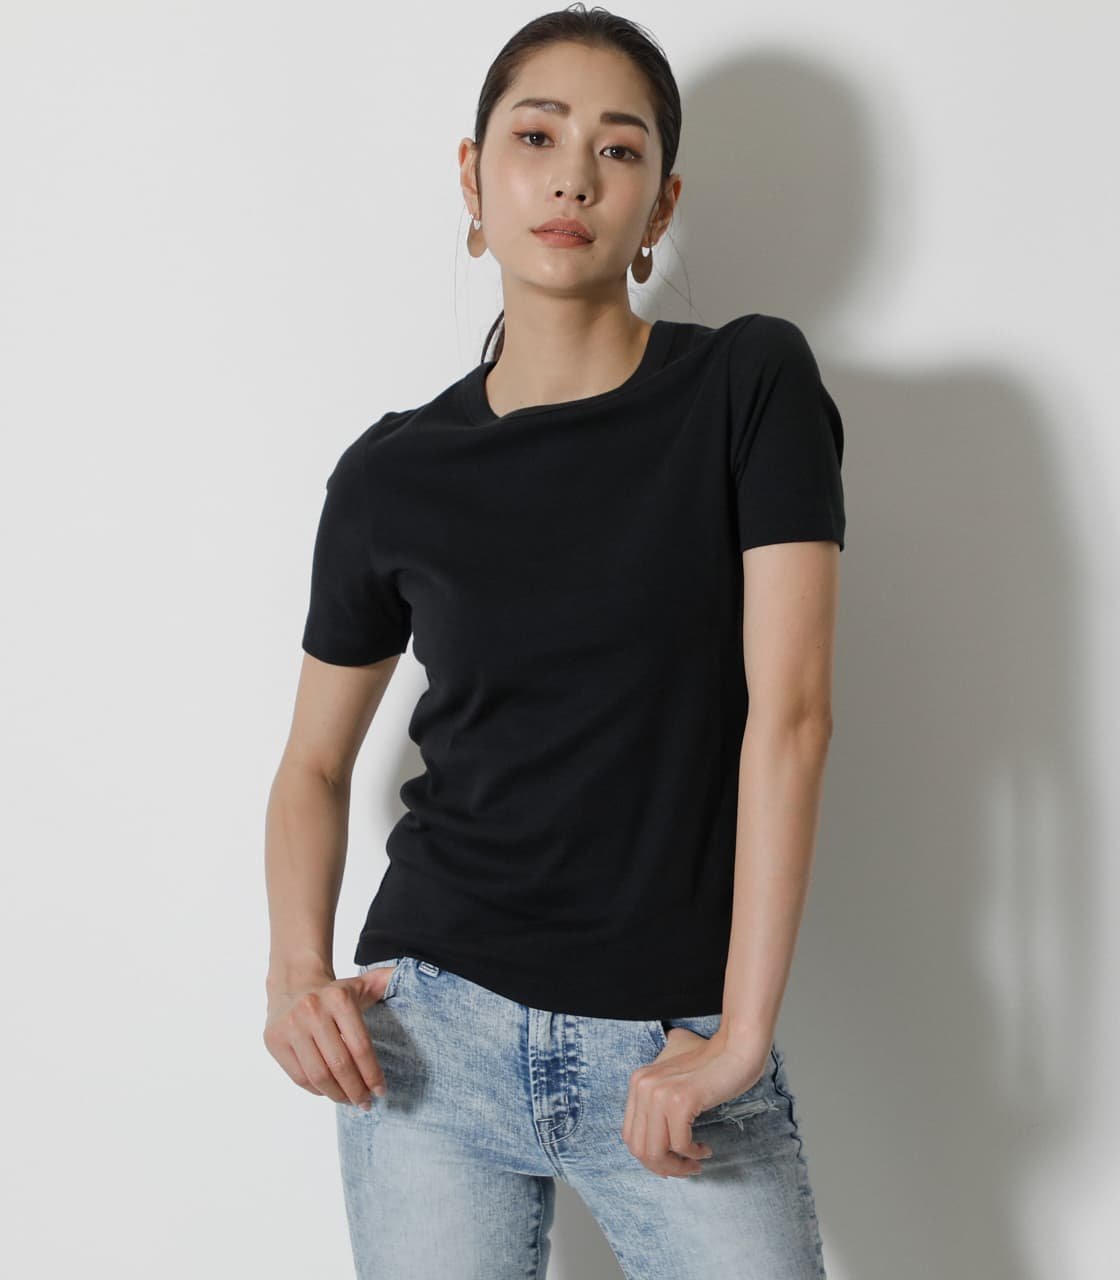 【SALE／55%OFF】AZUL by moussy COTTON USA FIT TEE アズールバイマウジー カットソー Tシャツ ホワイト ブラック イエロー ブラウン ブルー